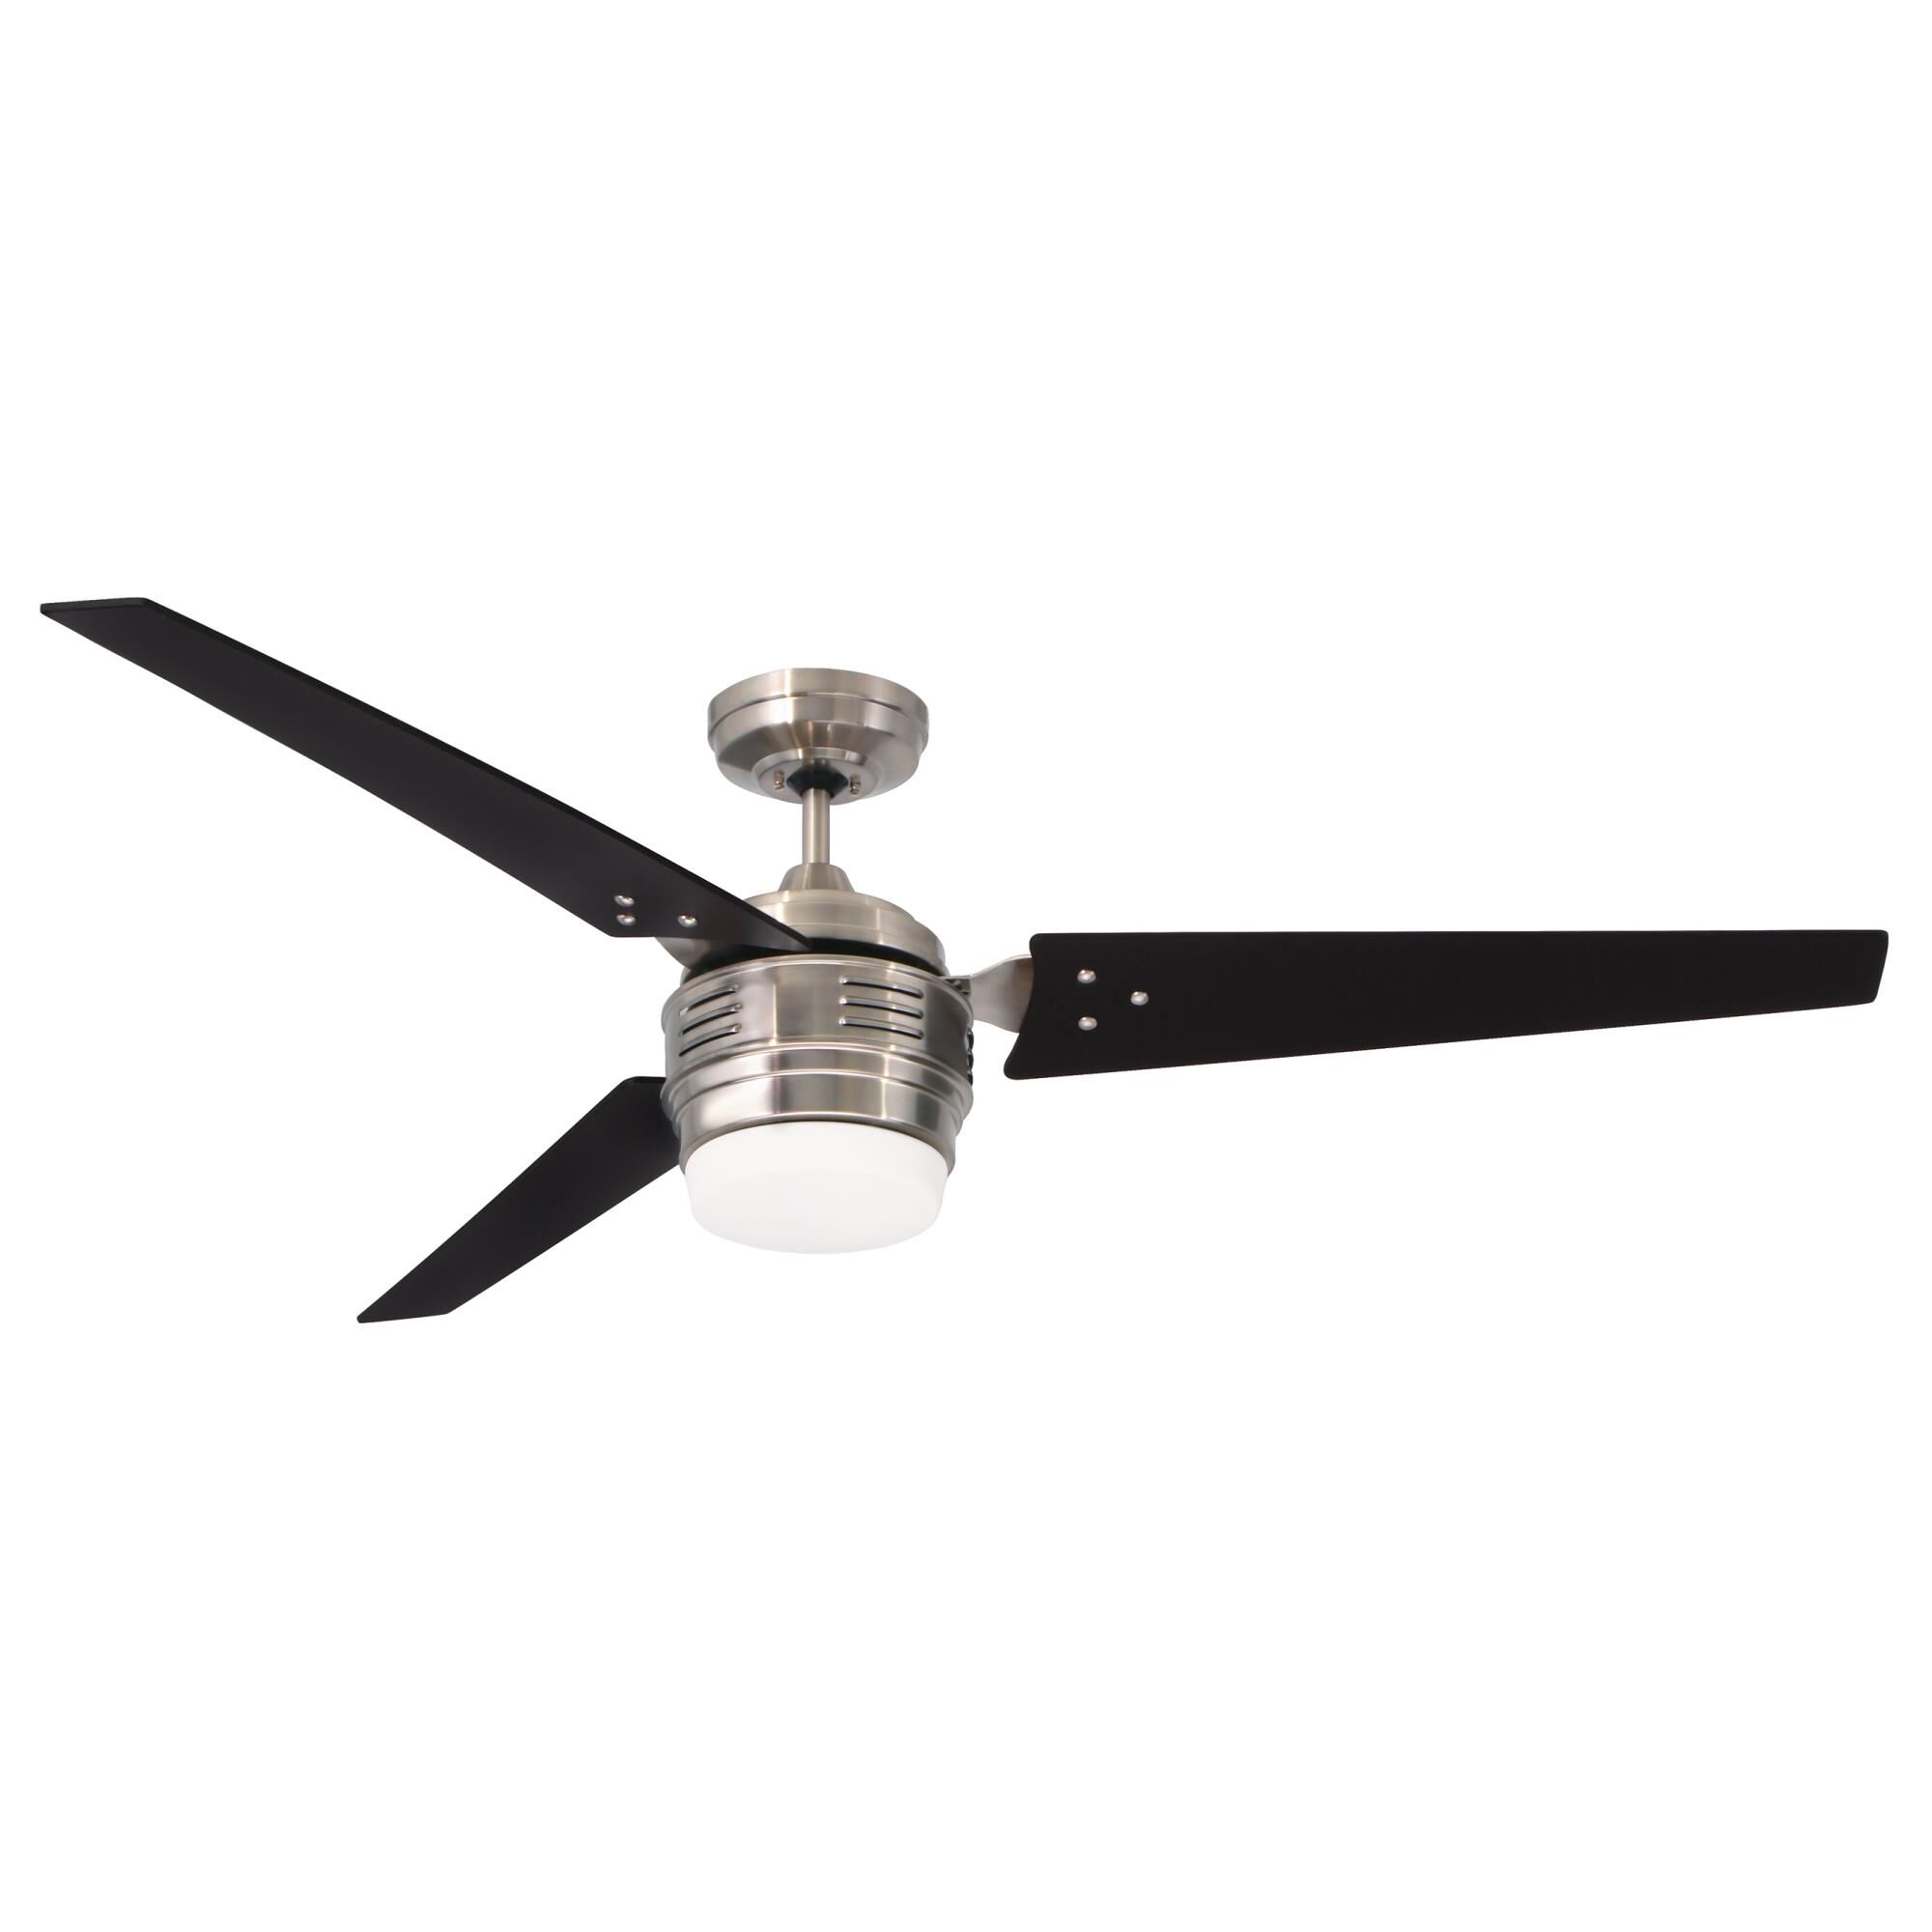 4th Avenue 60 Inch Ceiling Fan with Light Kit | Capitol Lighting  